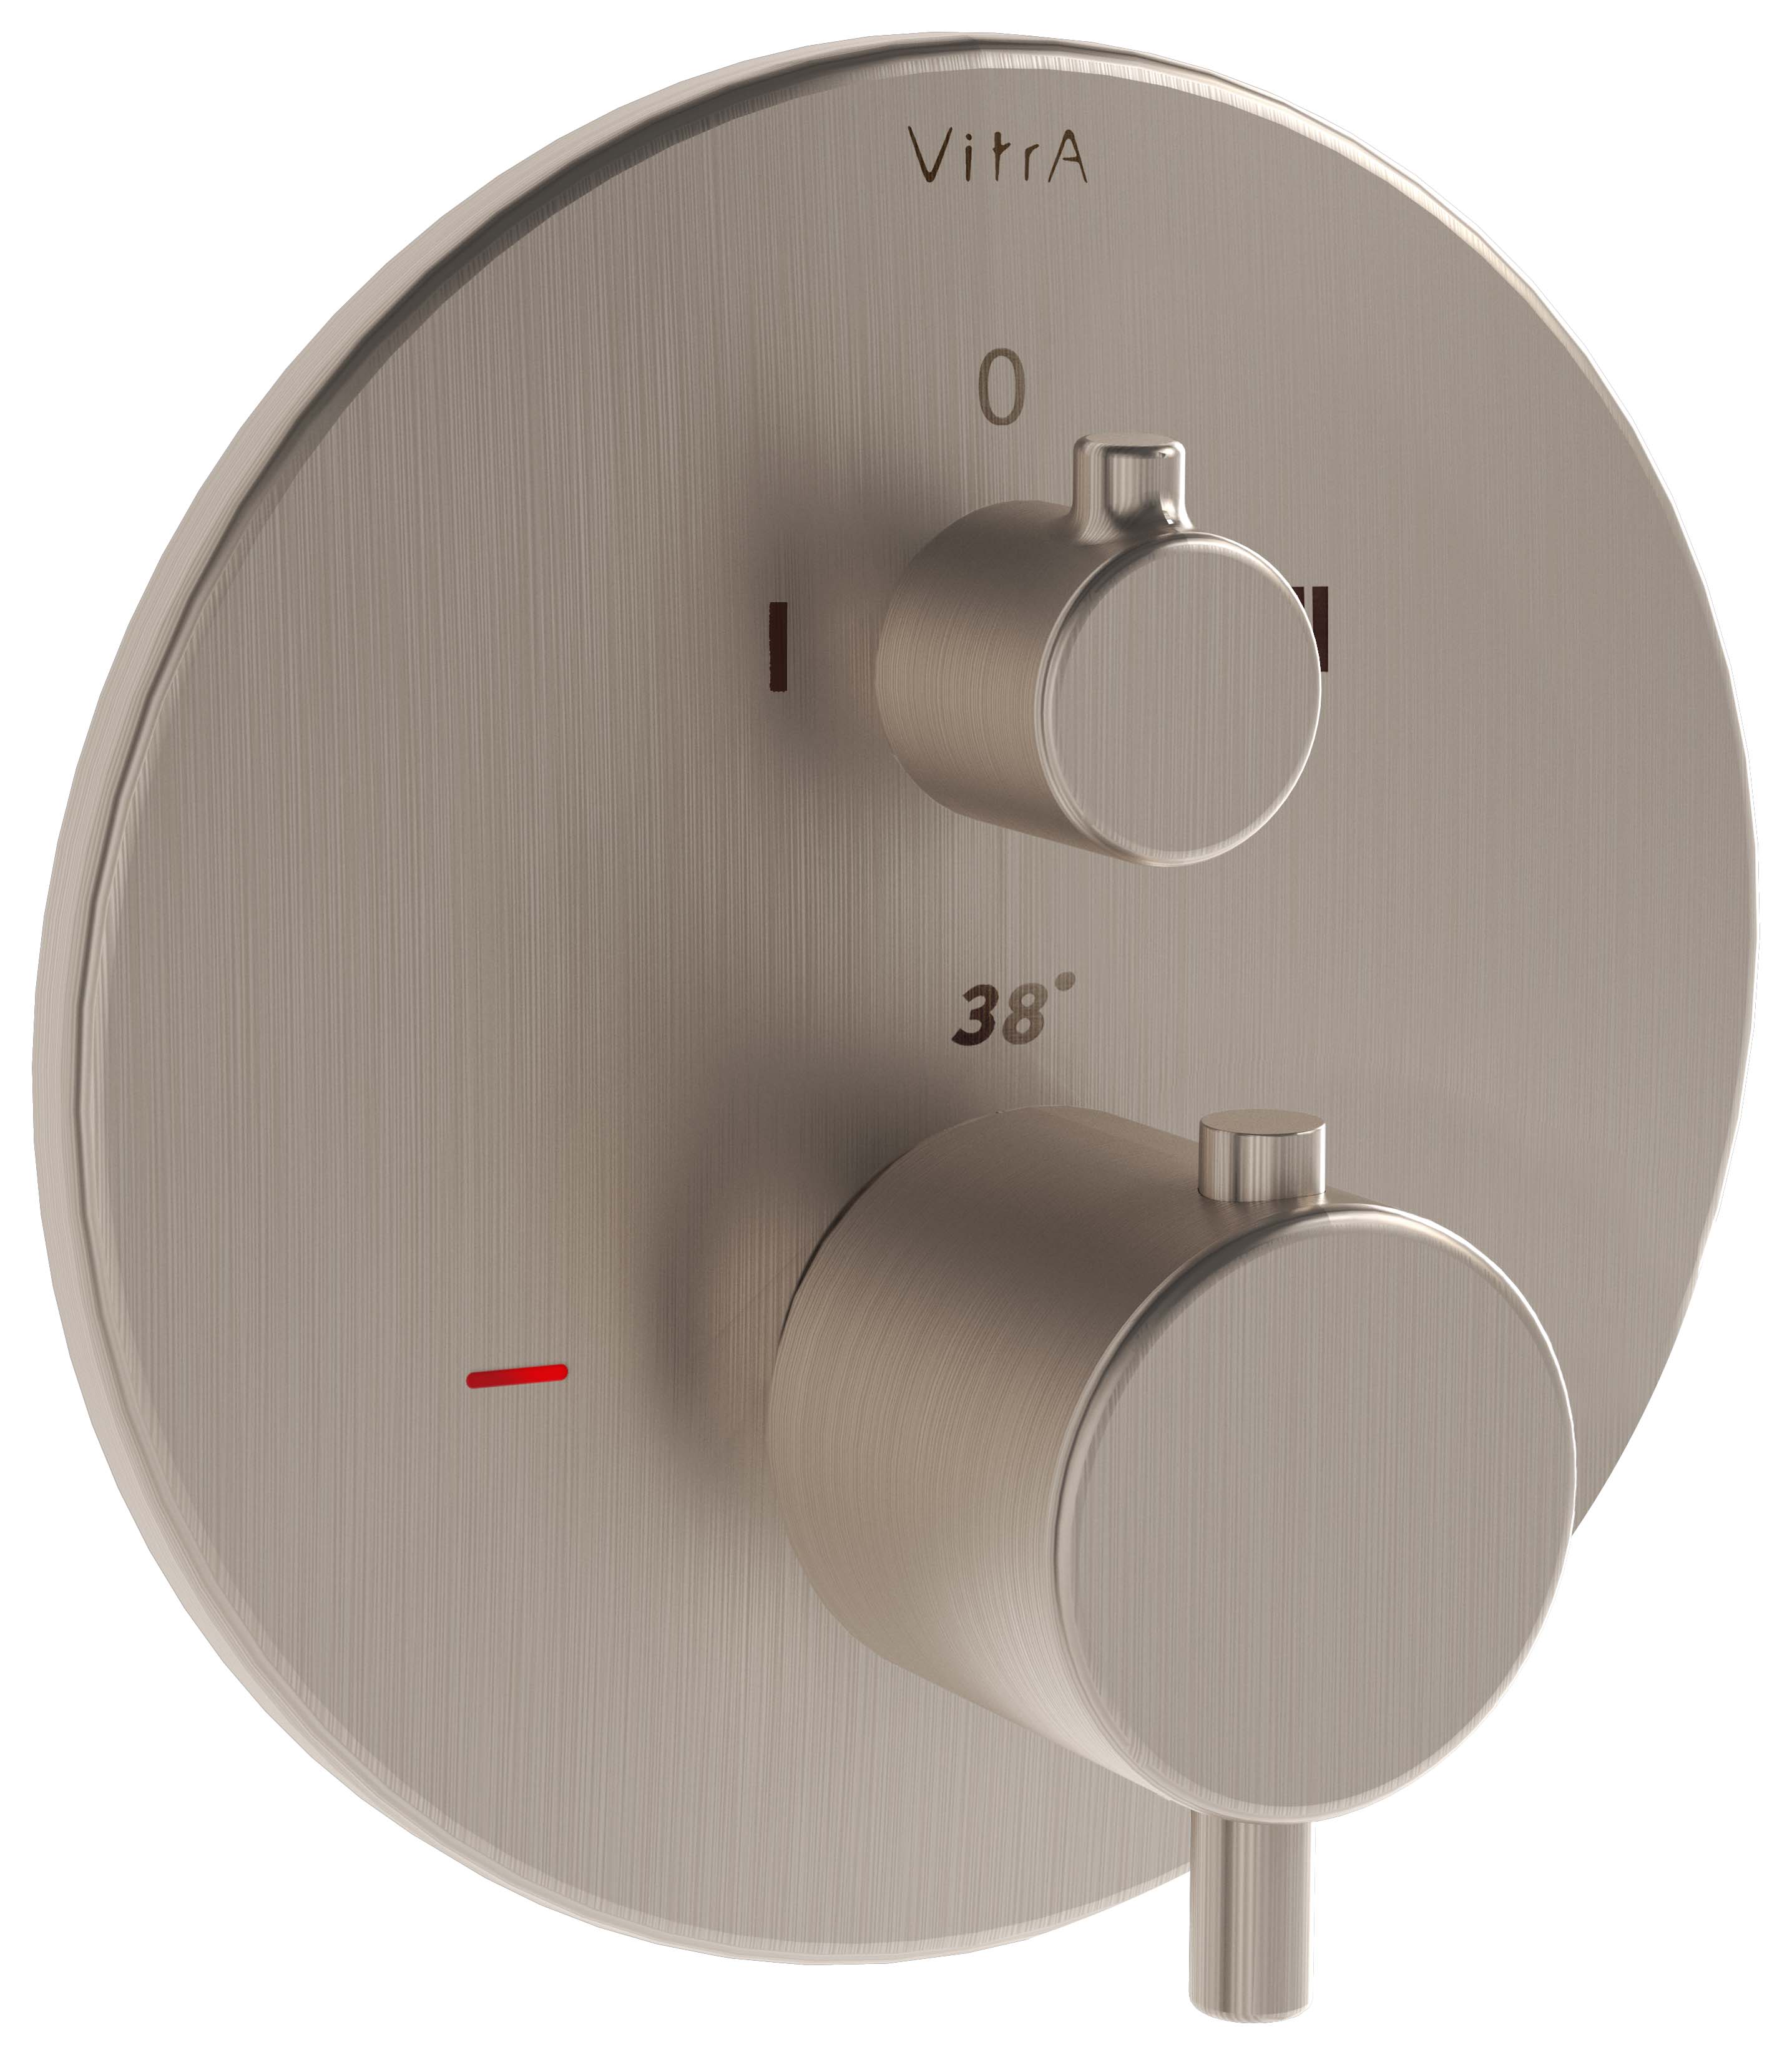 Image of VitrA Origin Round Built-In 2 Way Thermostatic Shower Mixer Valve - Brushed Nickel